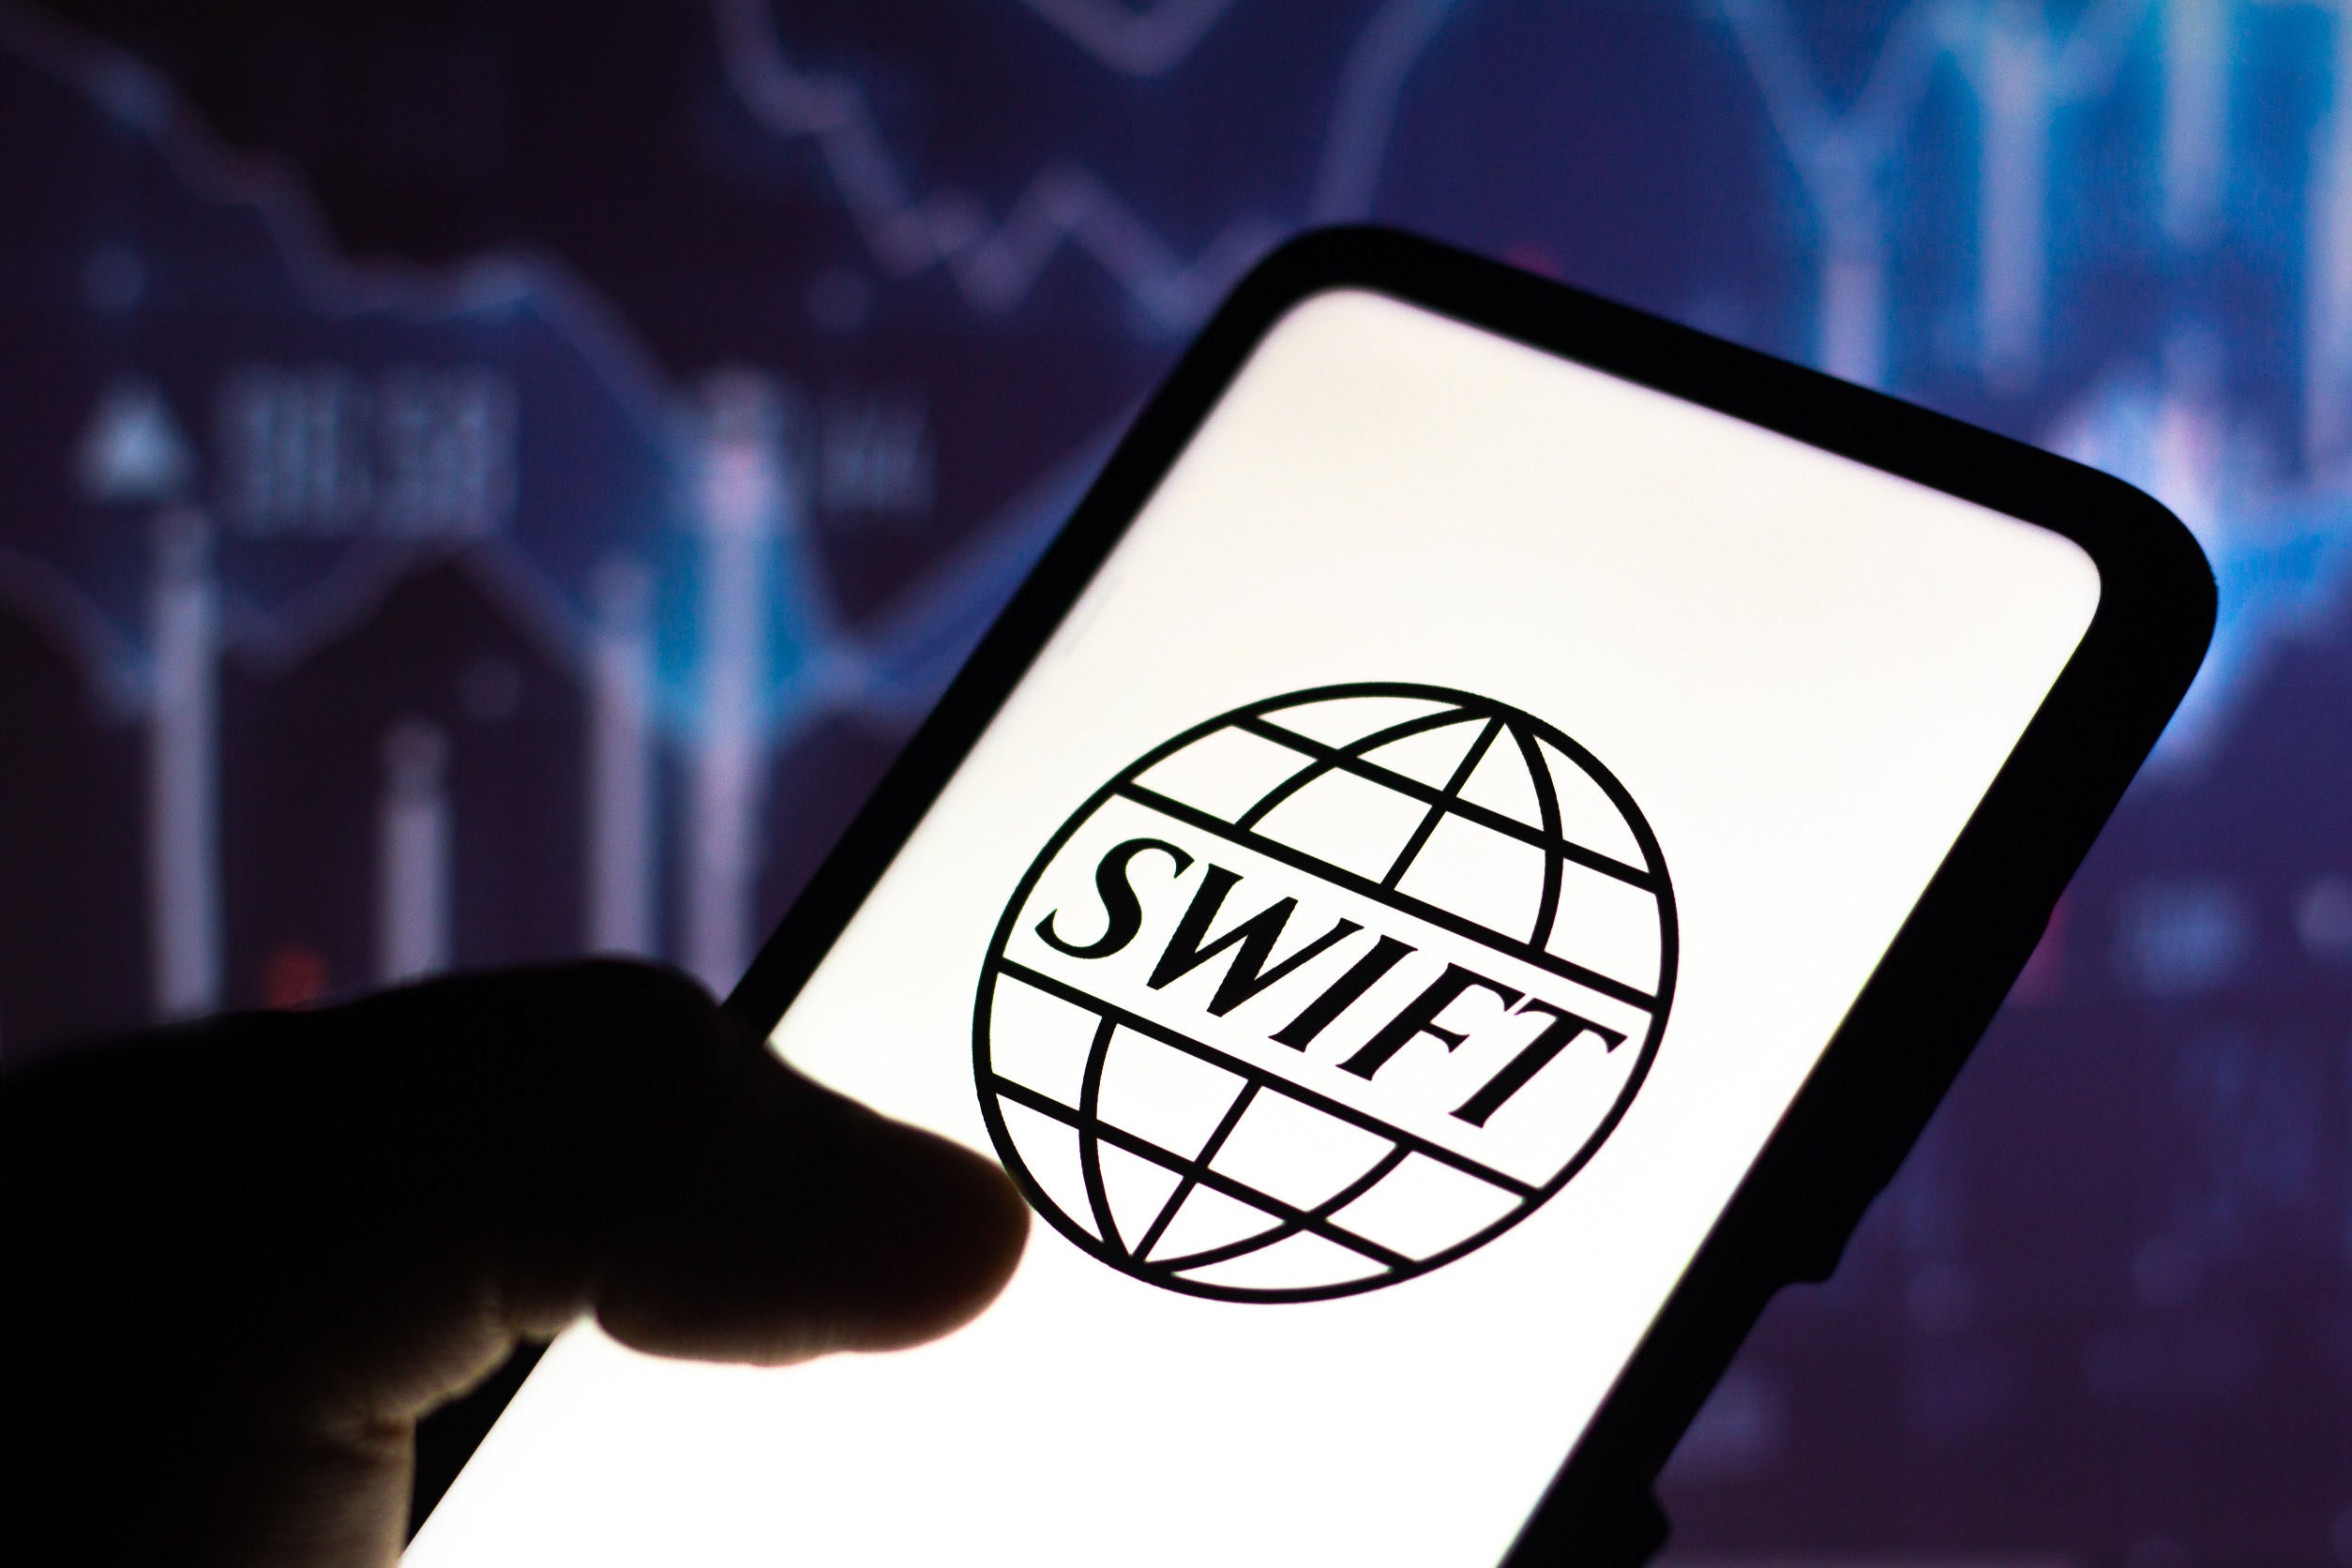 Swift Can Play A Central Role in Blockchain Interoperability: Report